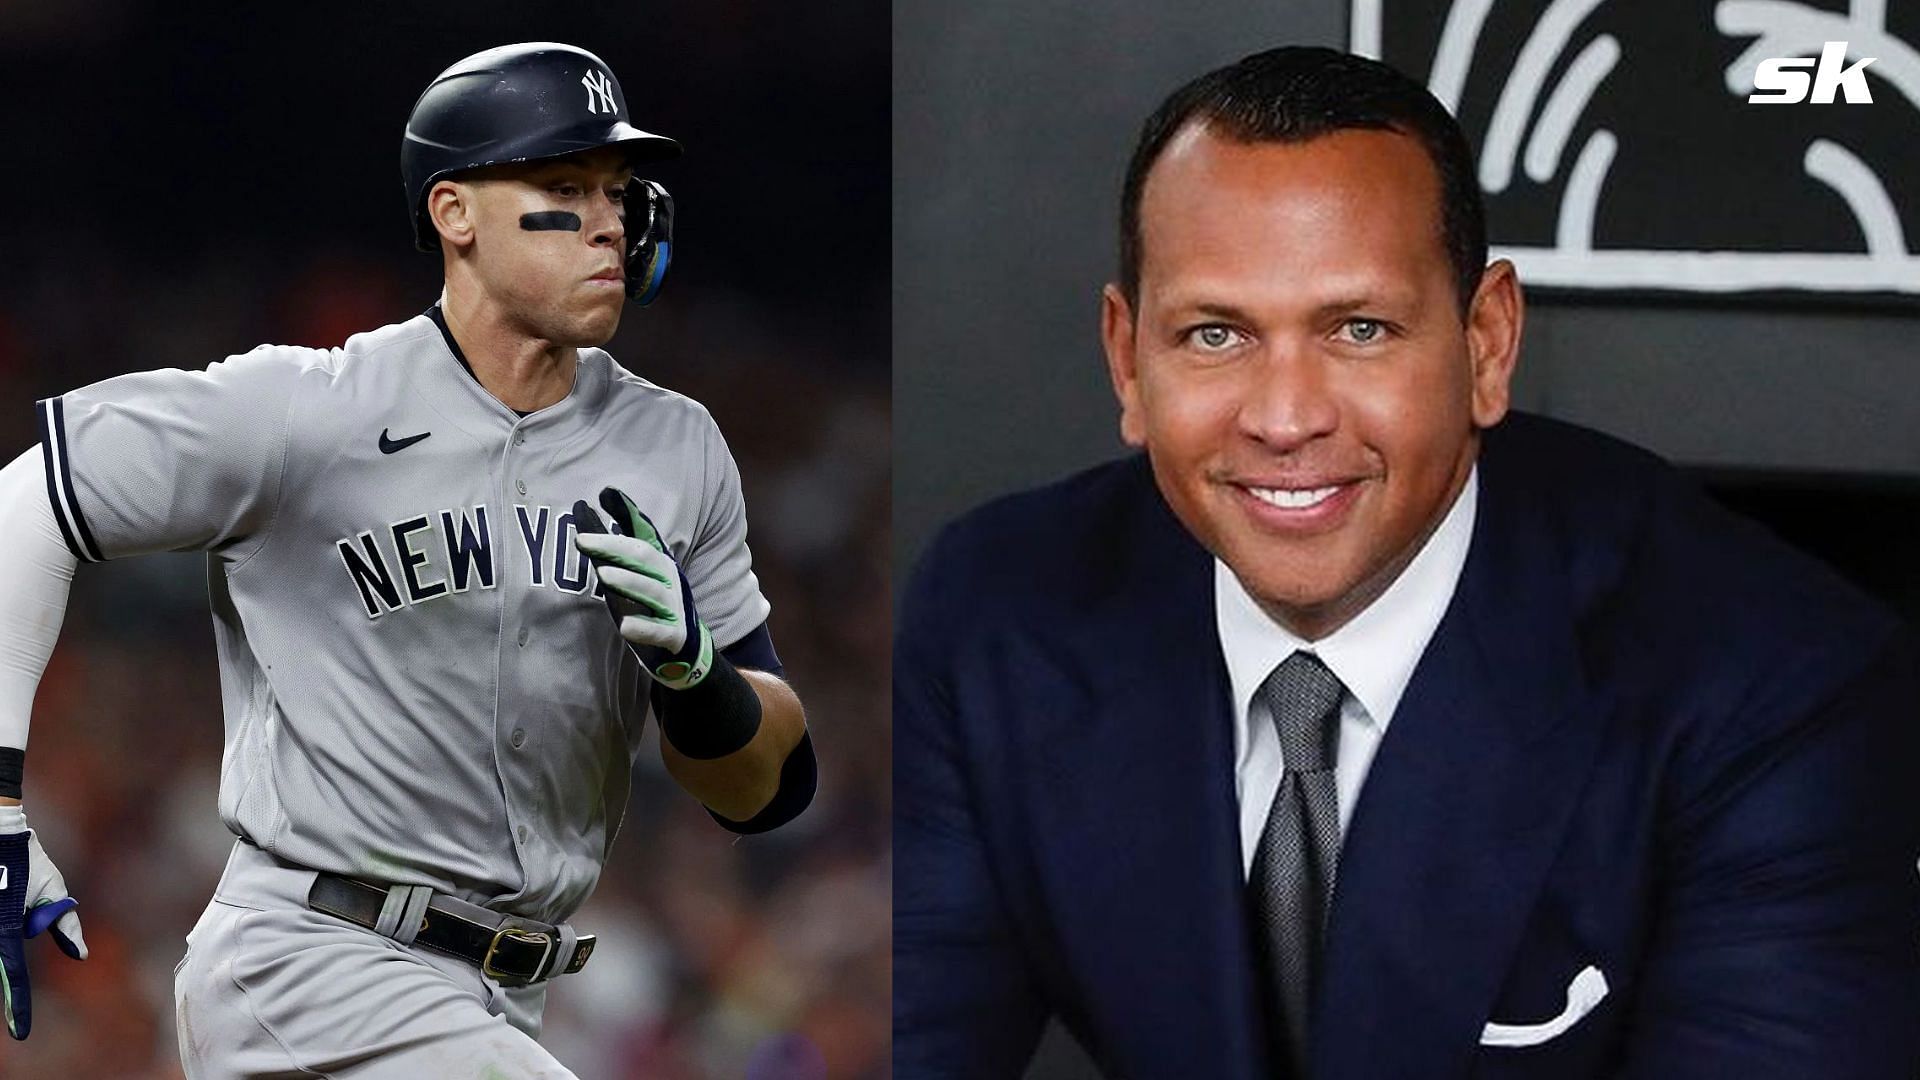 Alex Rodriguez on Aaron Judge being the face of MLB 2019 London series: Aaron  Judge is the one who jumps out of the screen because he's like a GoT  character